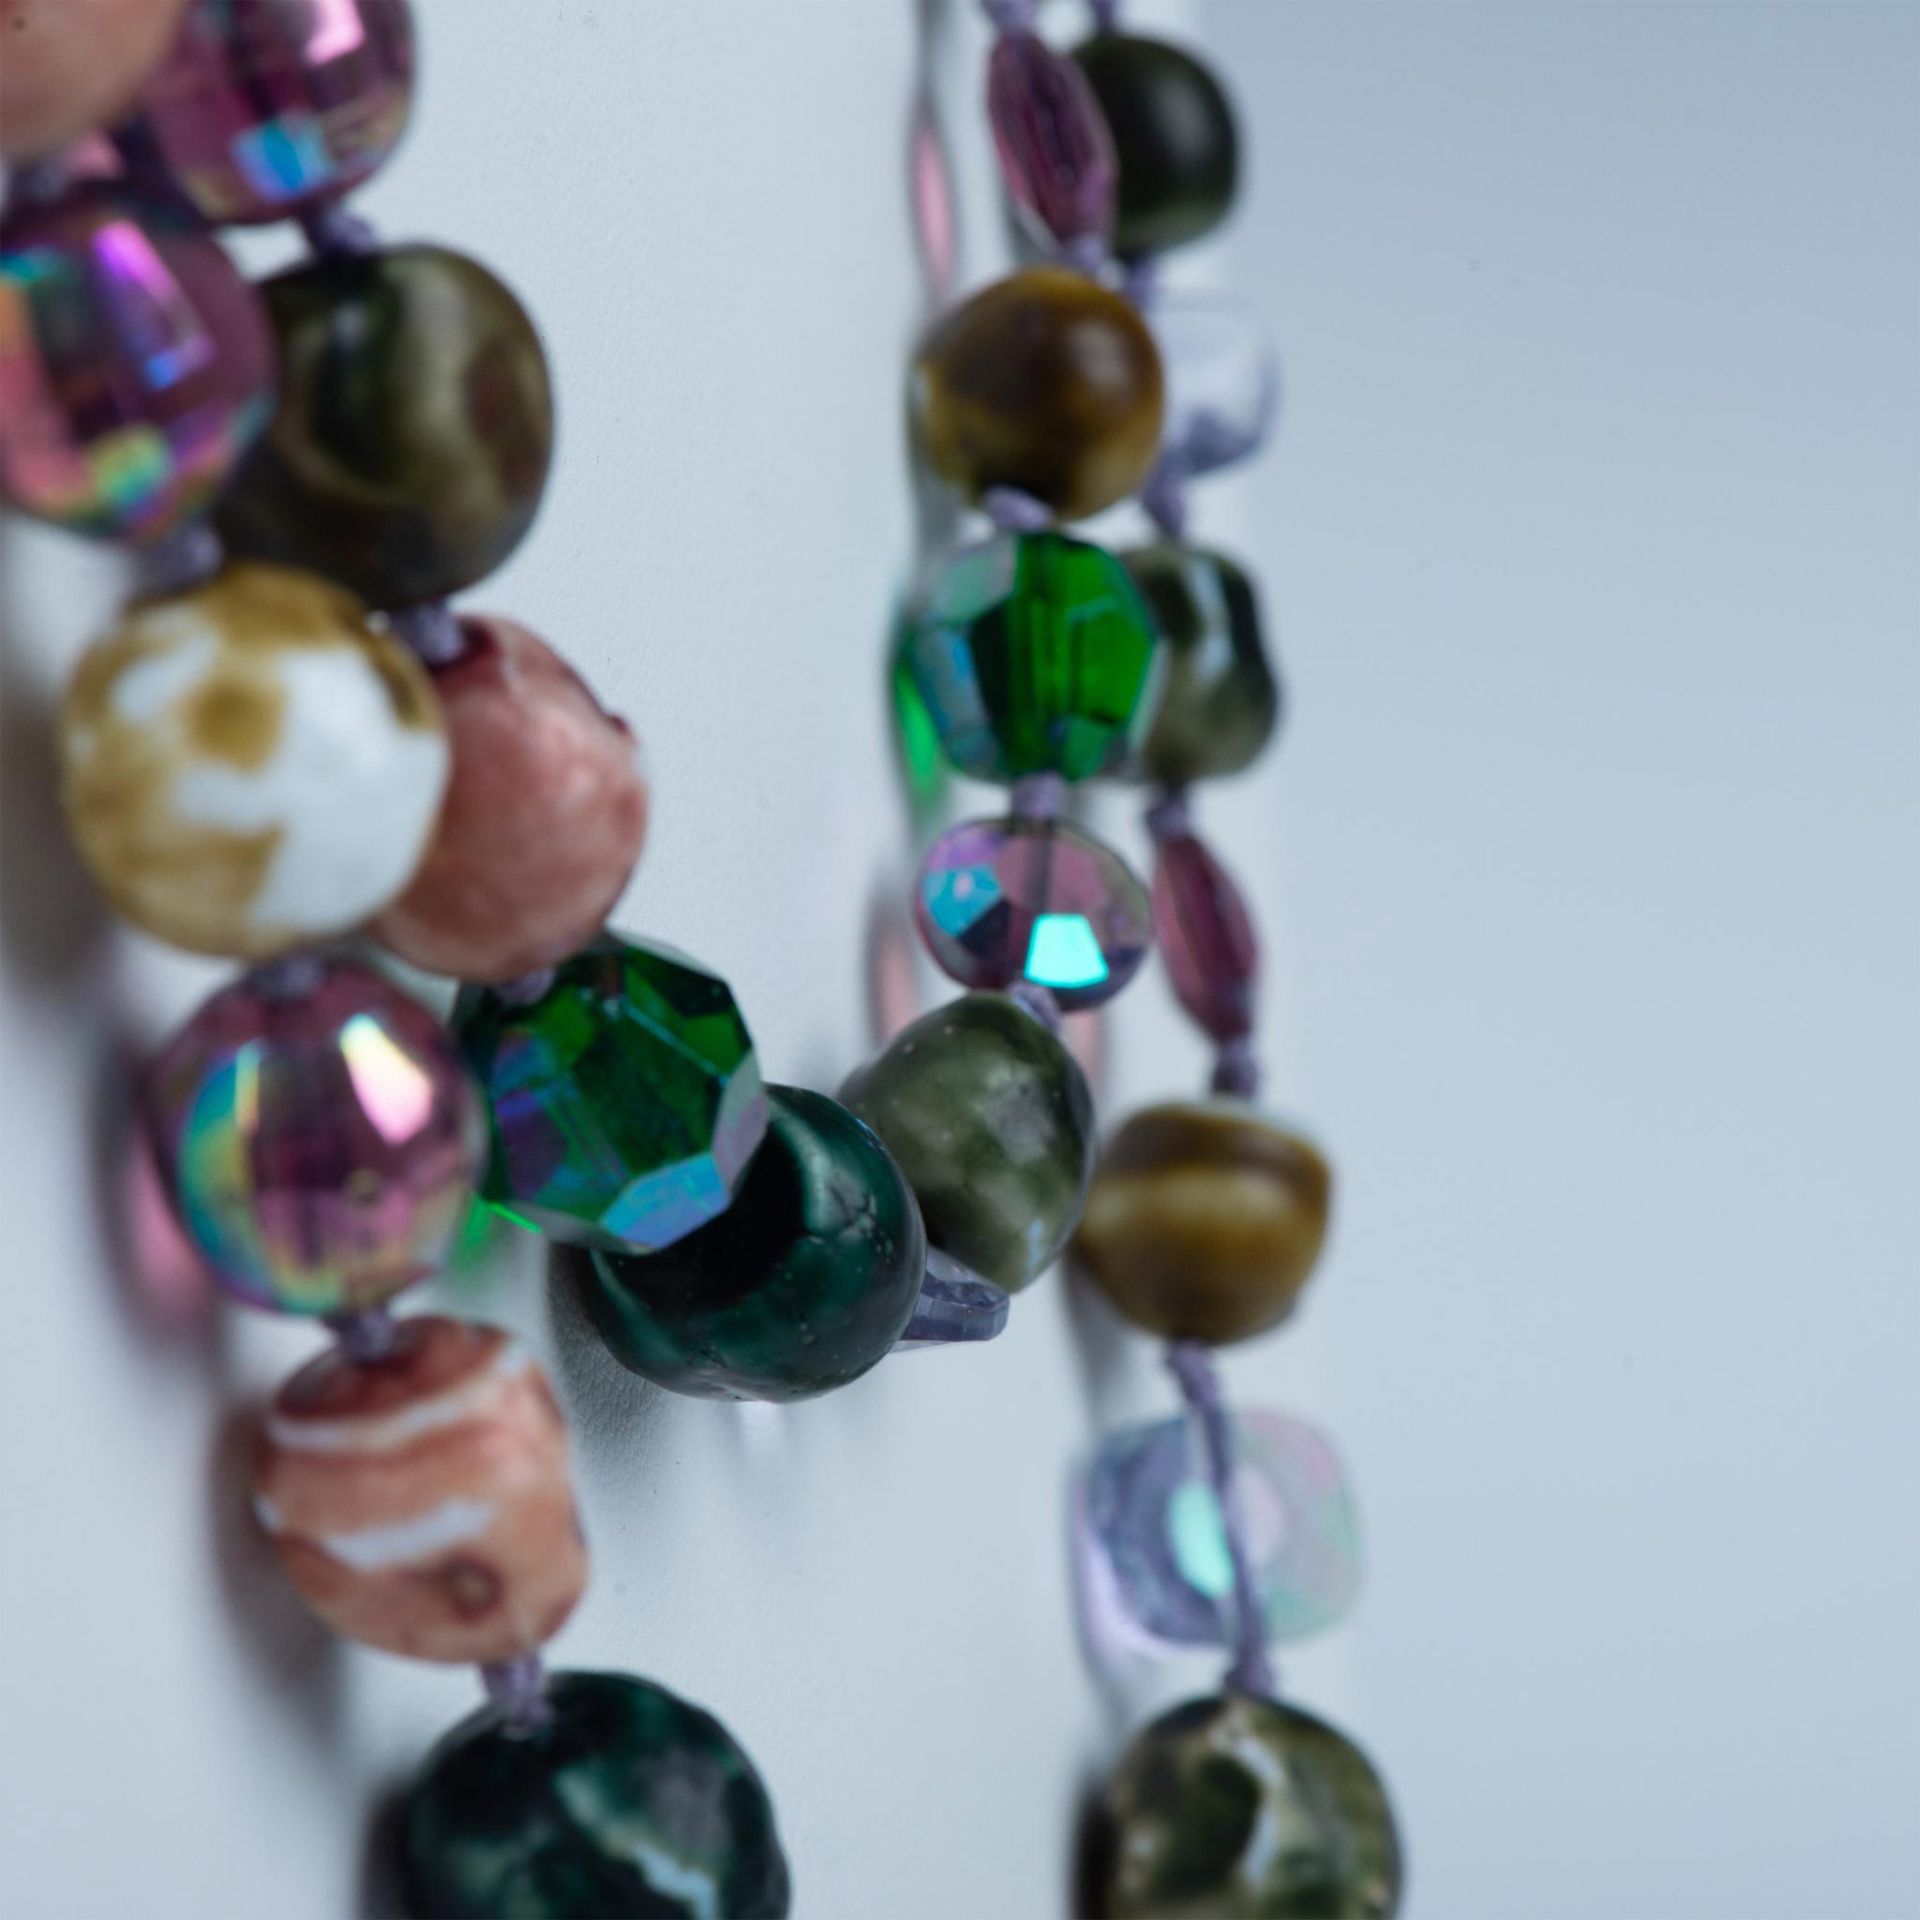 Colorful Art Glass Bead Necklace - Image 2 of 3